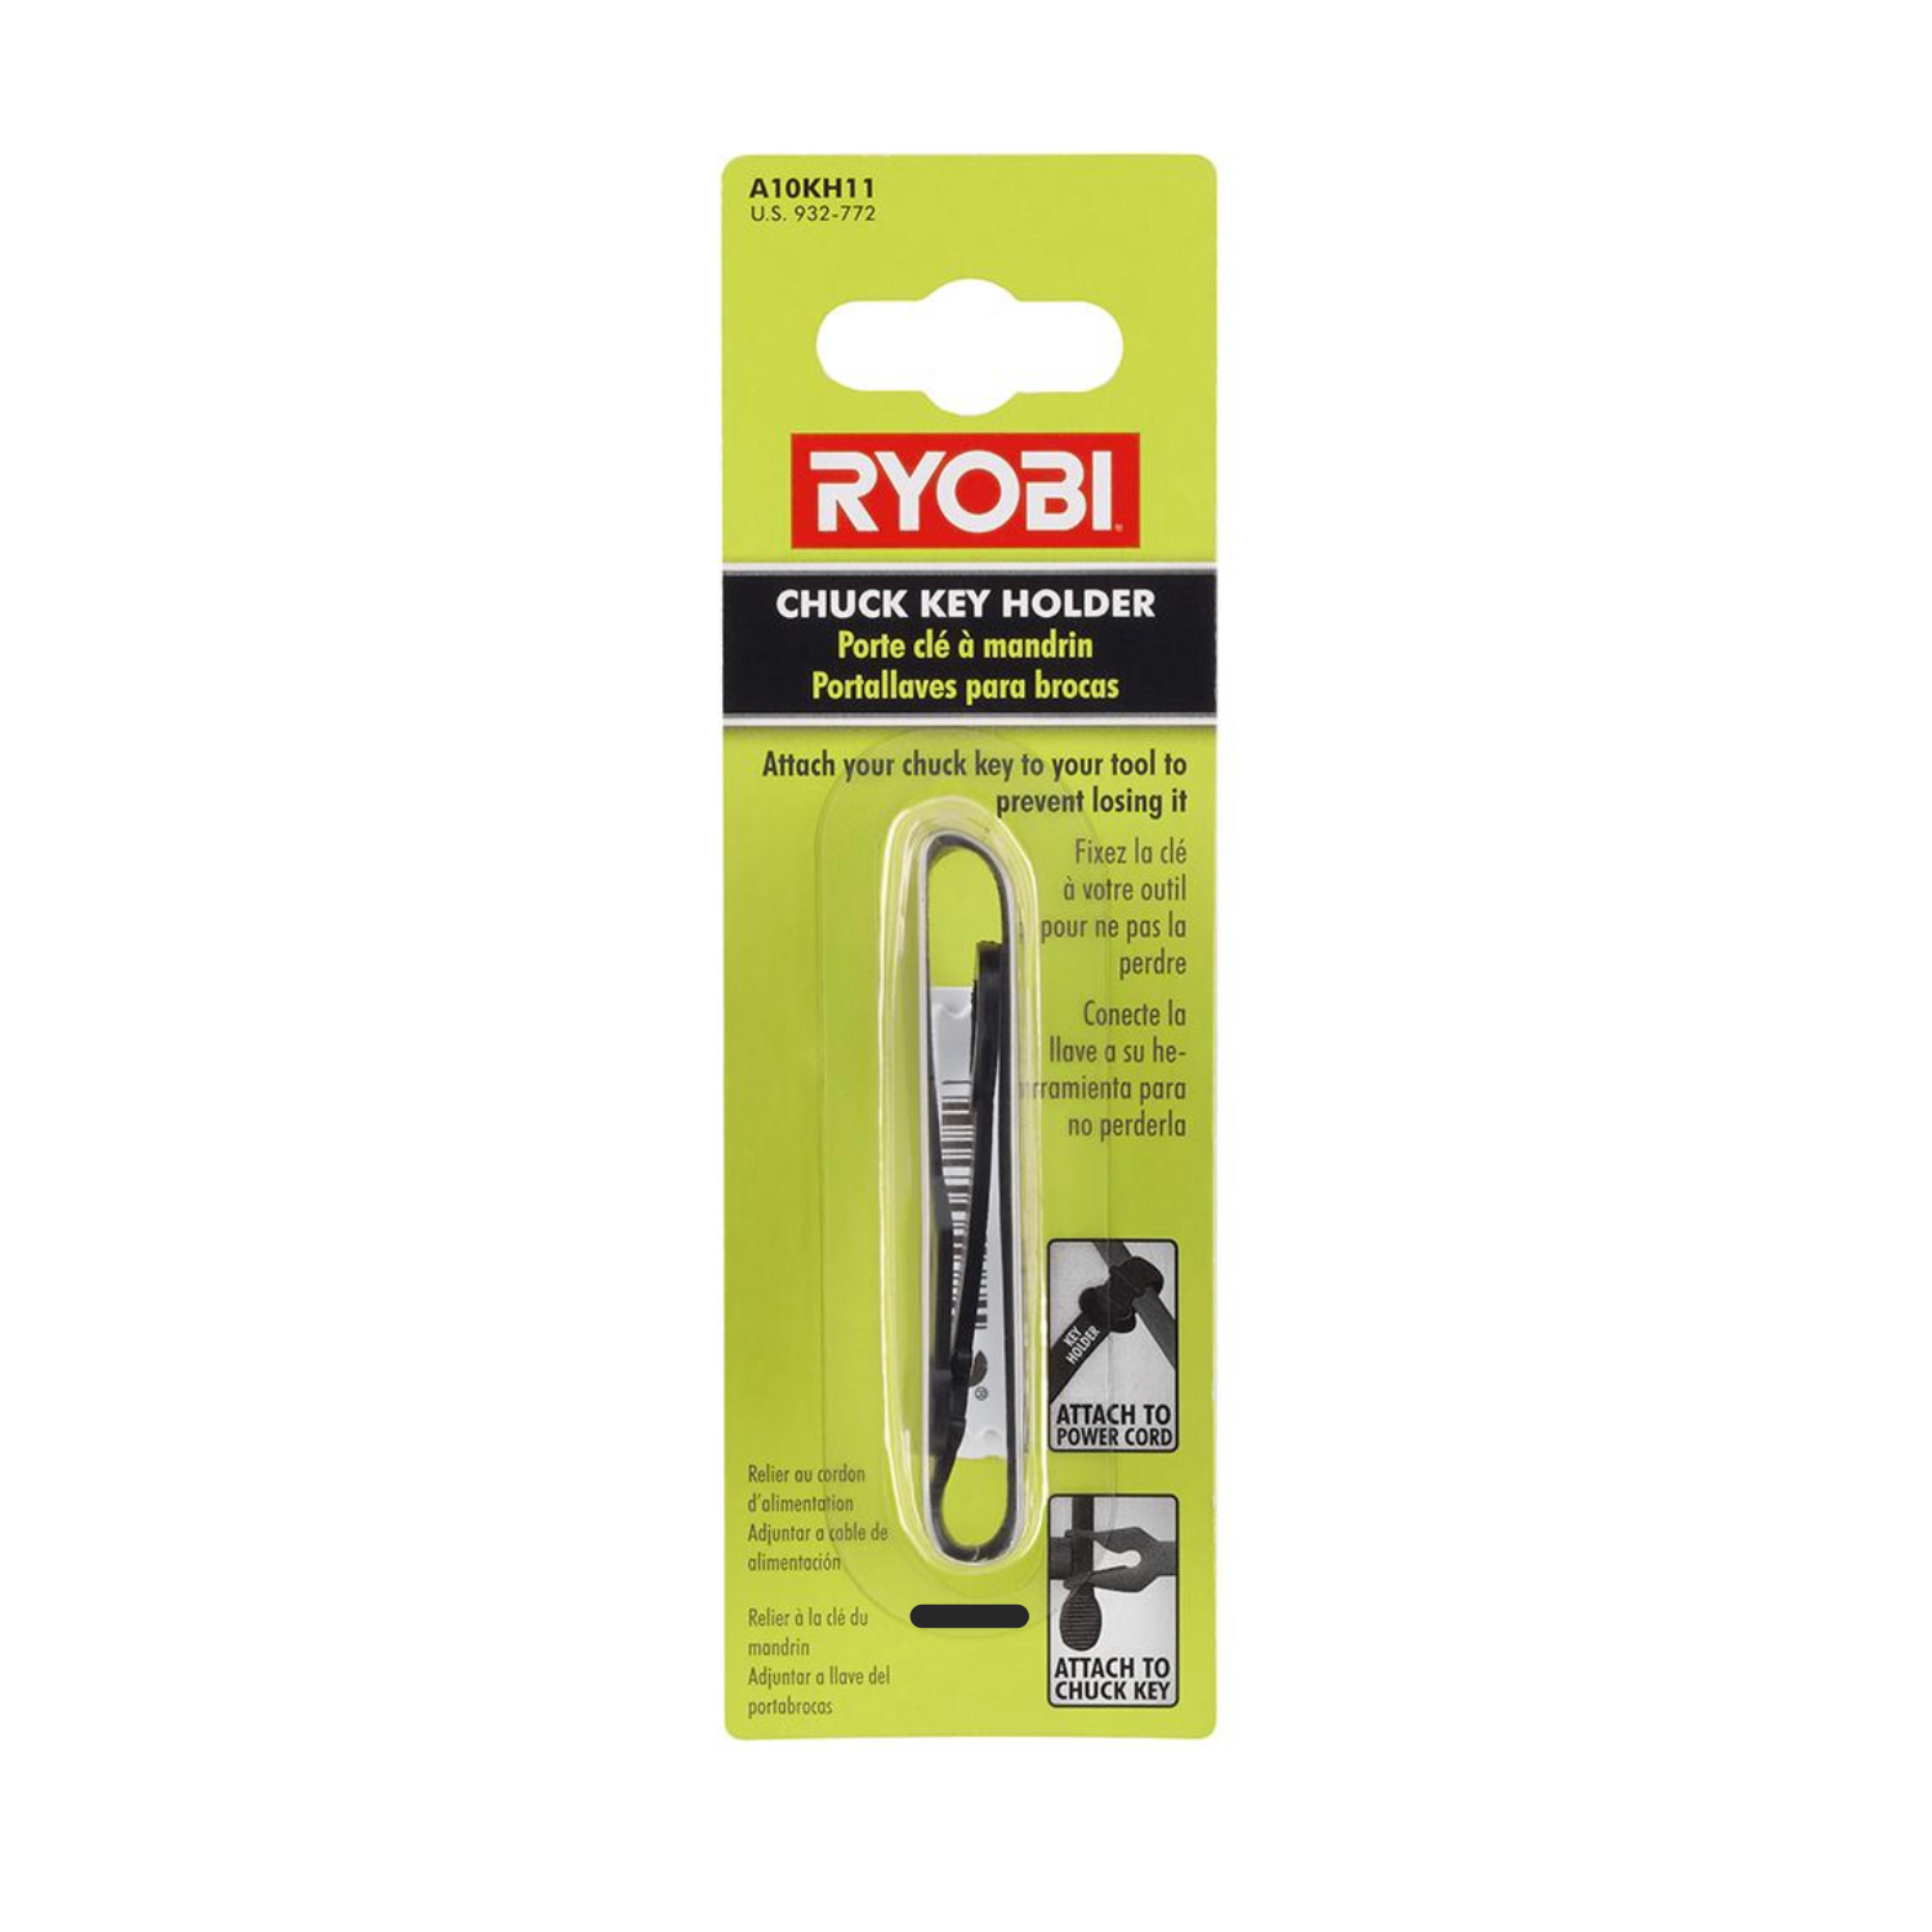 CLEARANCE 5/8 in. Black Metal Chuck Key with 5/16 in. Pilot – Ryobi Deal  Finders